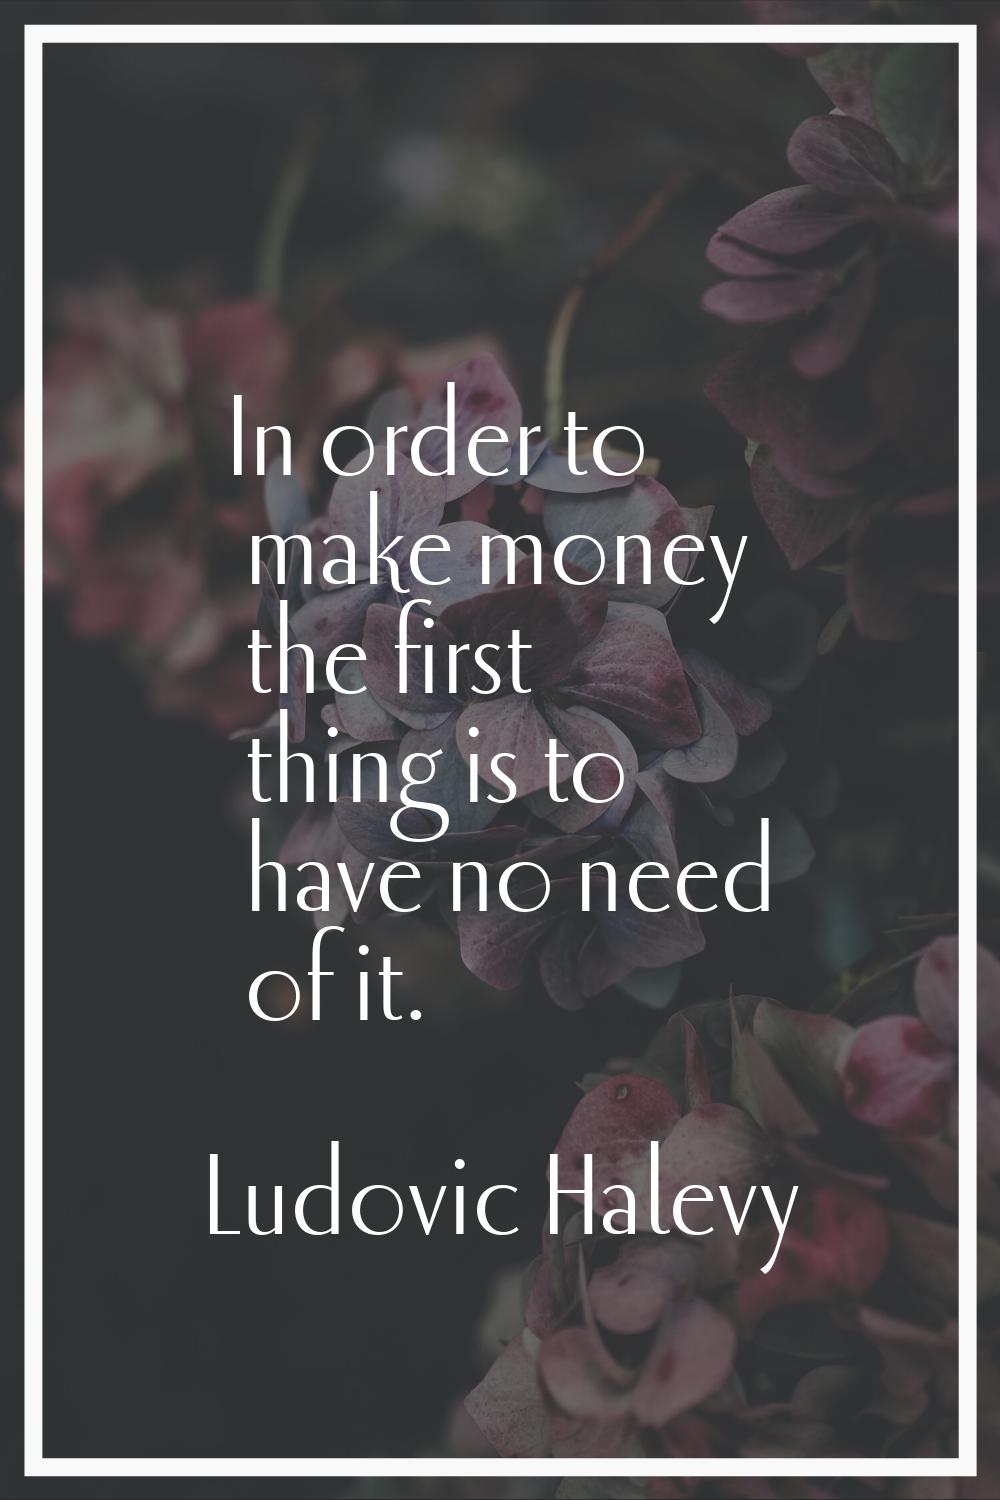 In order to make money the first thing is to have no need of it.